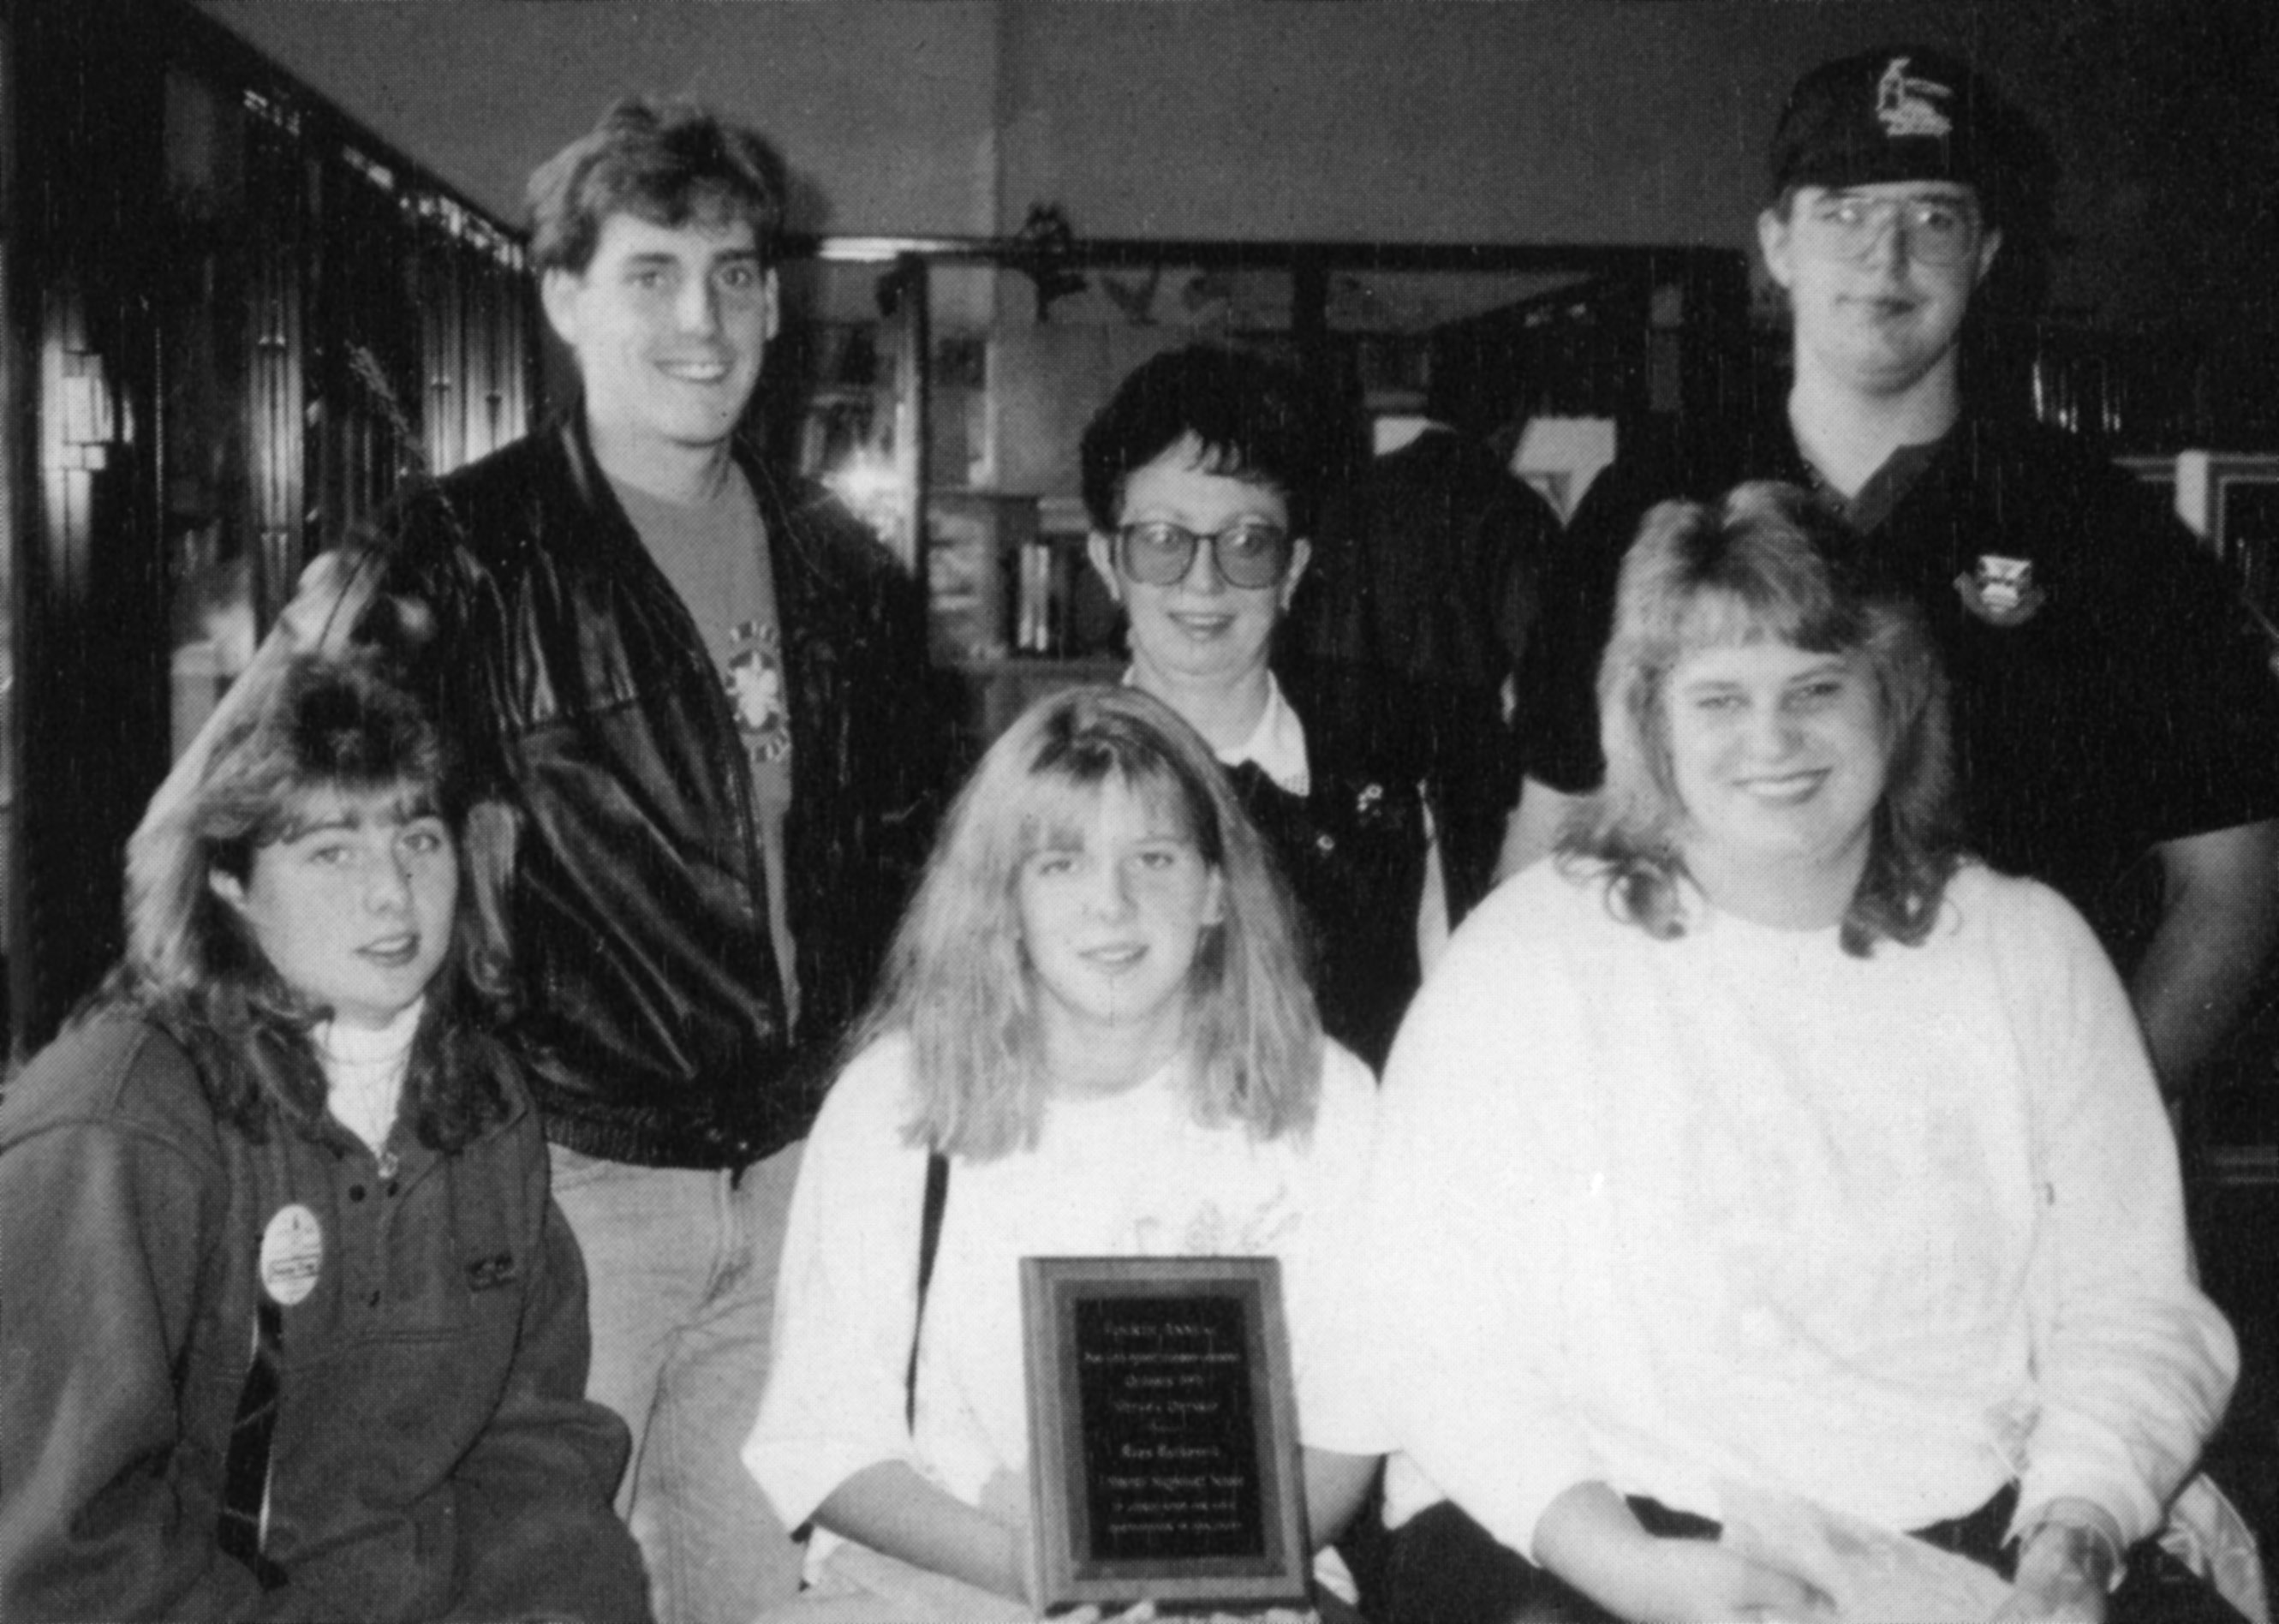 (Click to magnify) FRONT ROW: Denise Clegg, Stavey Bell, Tina Jansen; ***BACK ROW: Ian Davidson, Dawne Duckworth, Kevin Hoover.